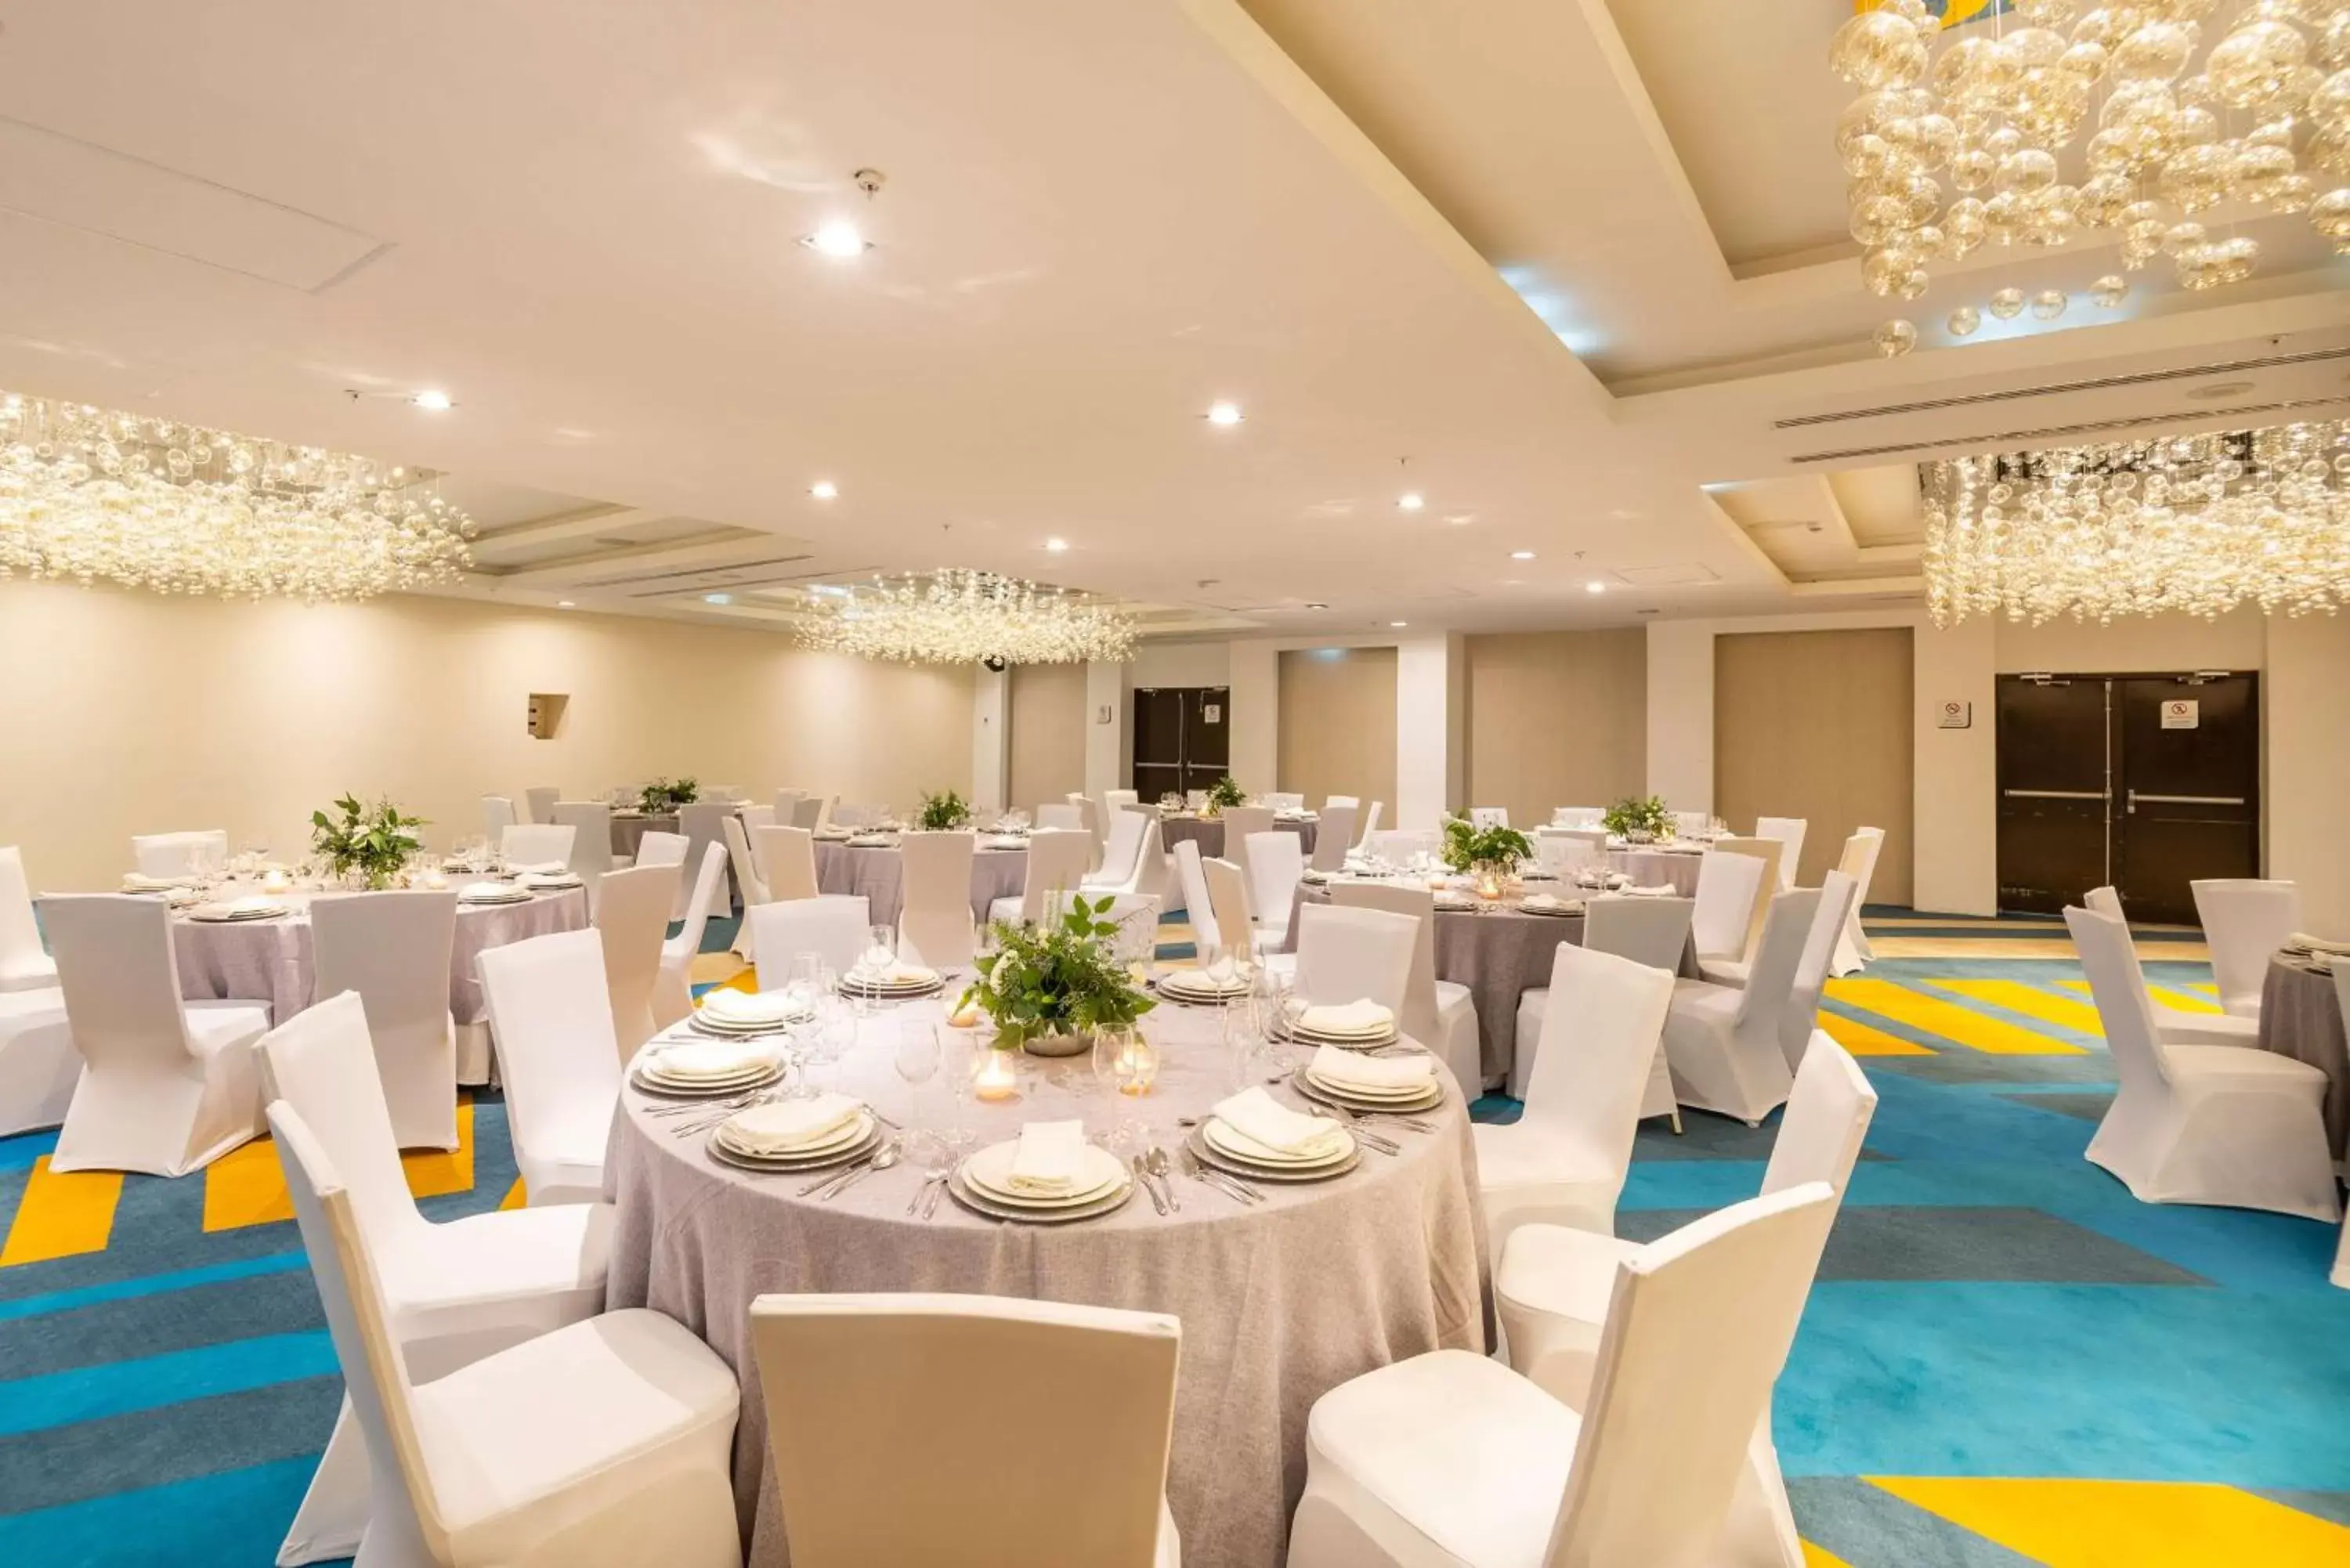 Meeting/conference room, Banquet Facilities in DoubleTree by Hilton Mazatlan, SIN